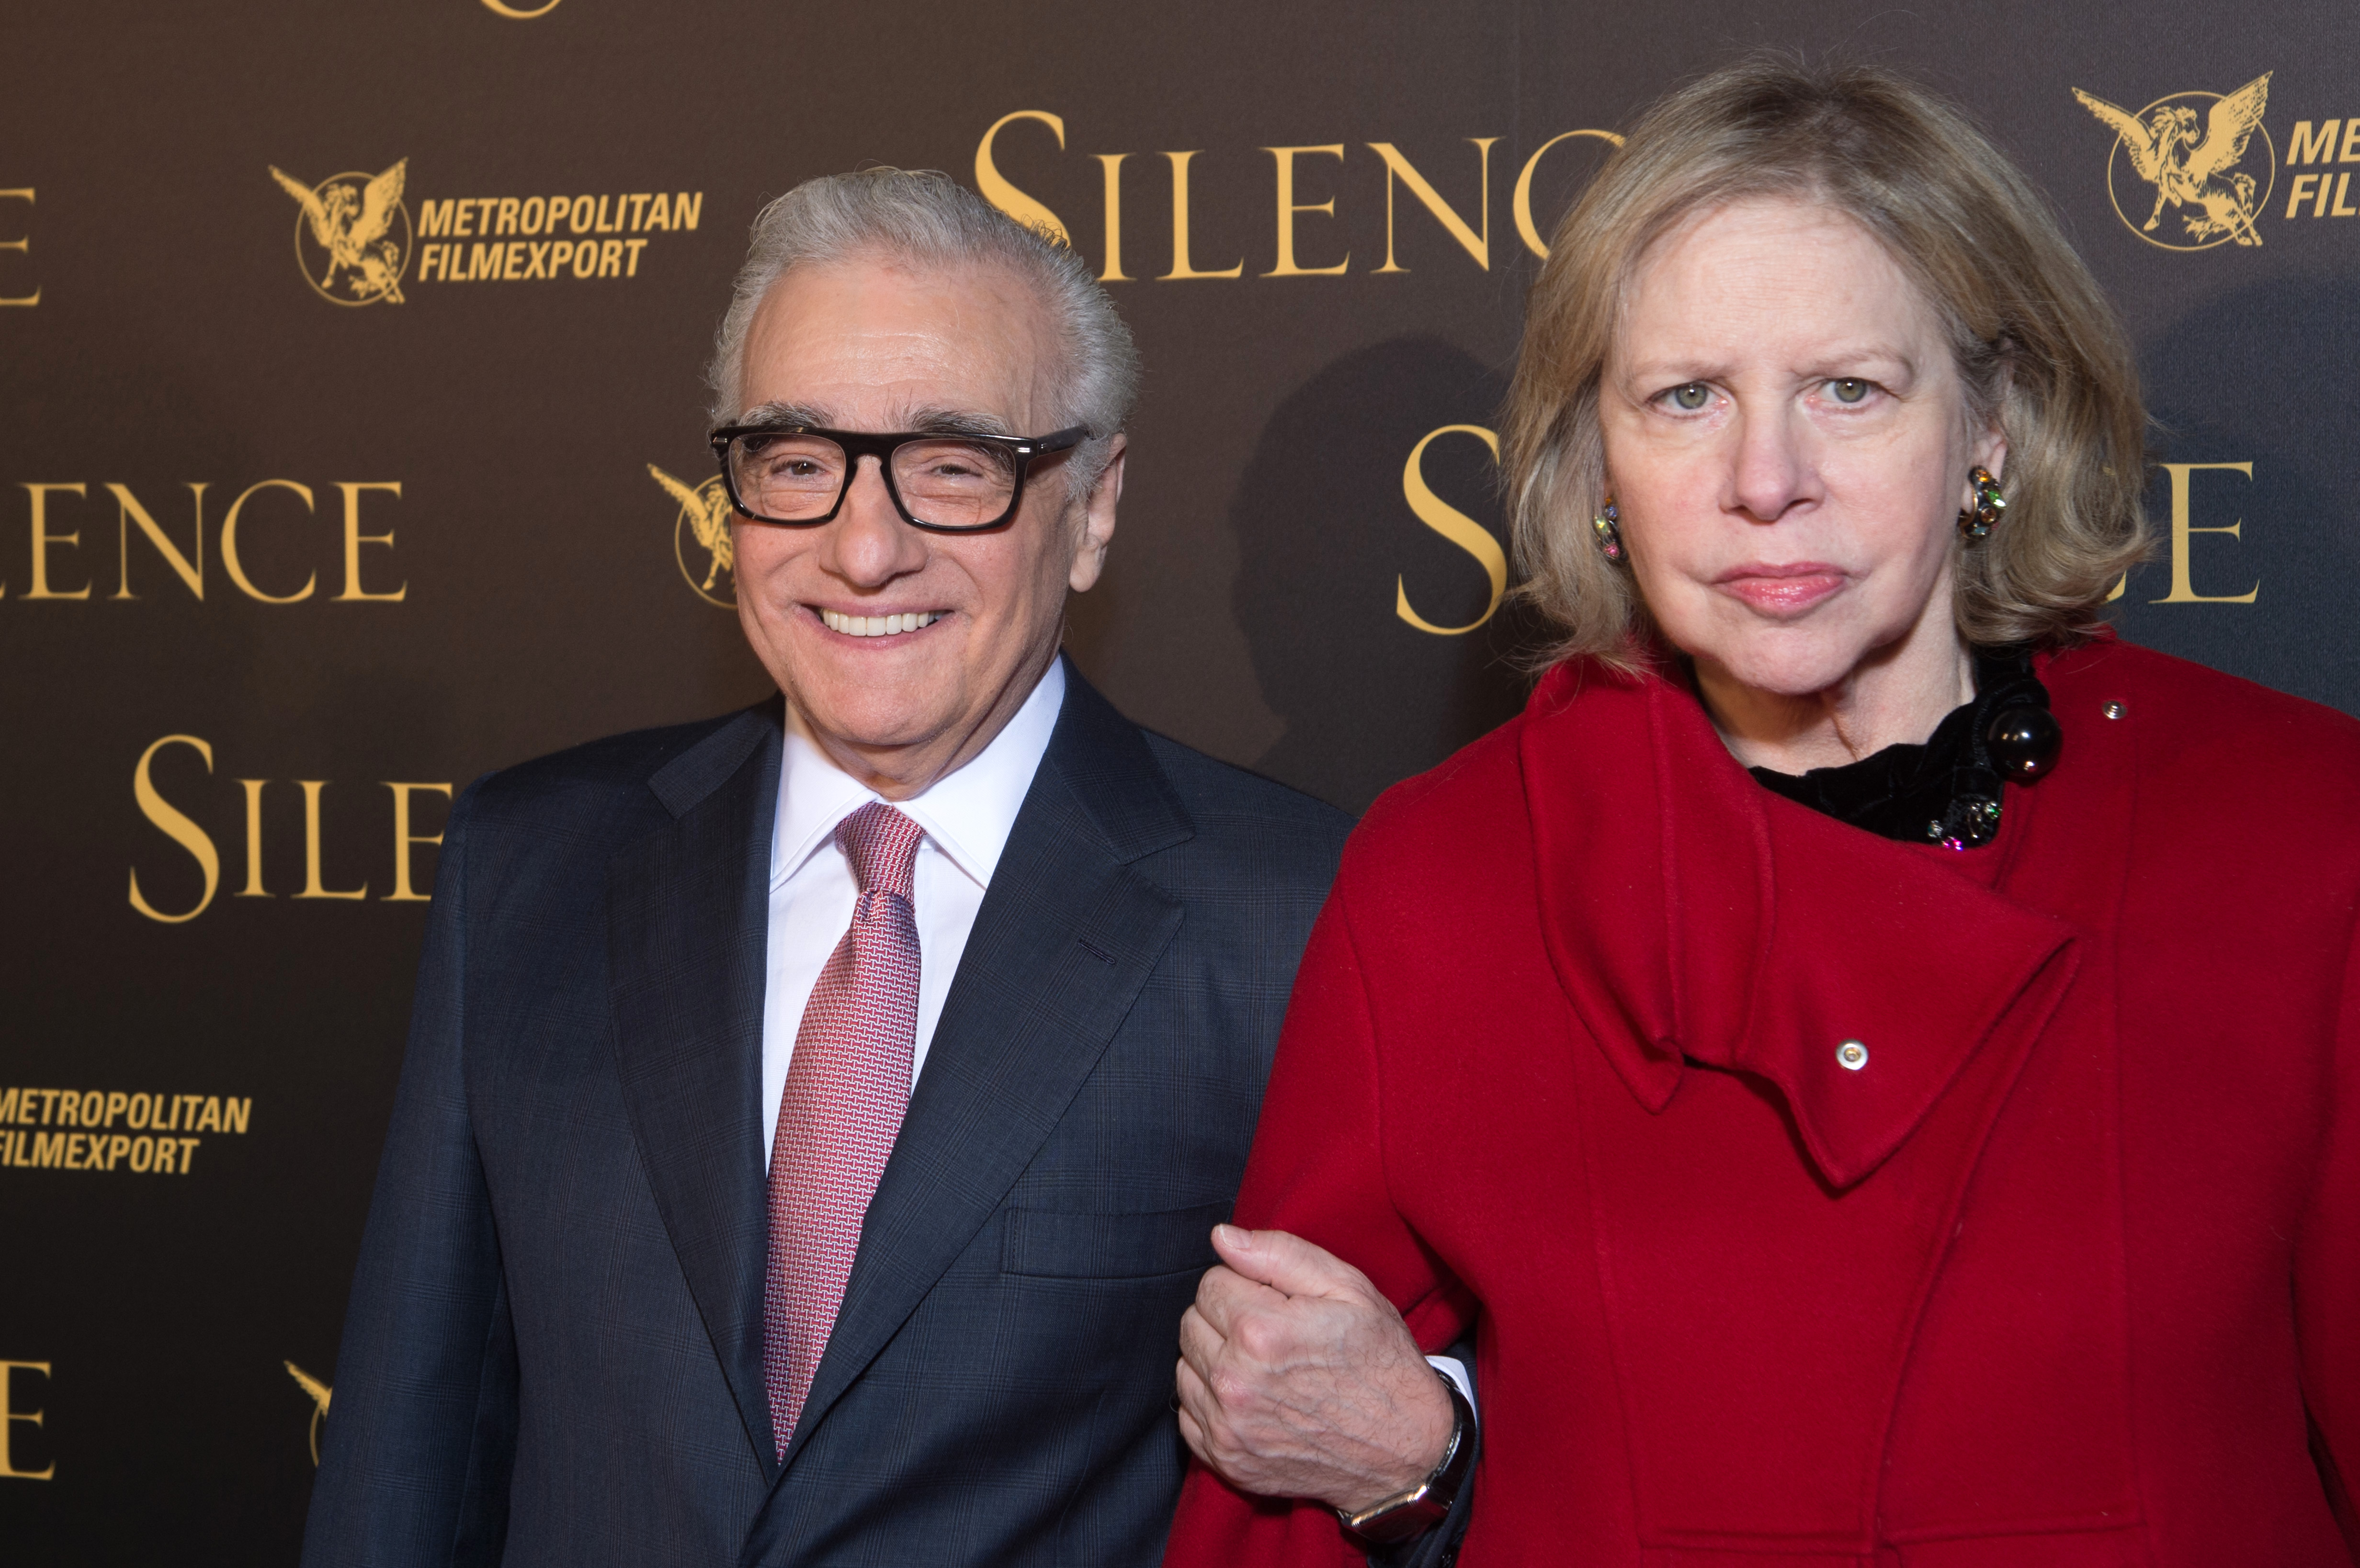 Martin Scorsese and Helen Morris at the premiere of "Silence" on January 12, 2017, in Paris, France. | Source: Getty Images